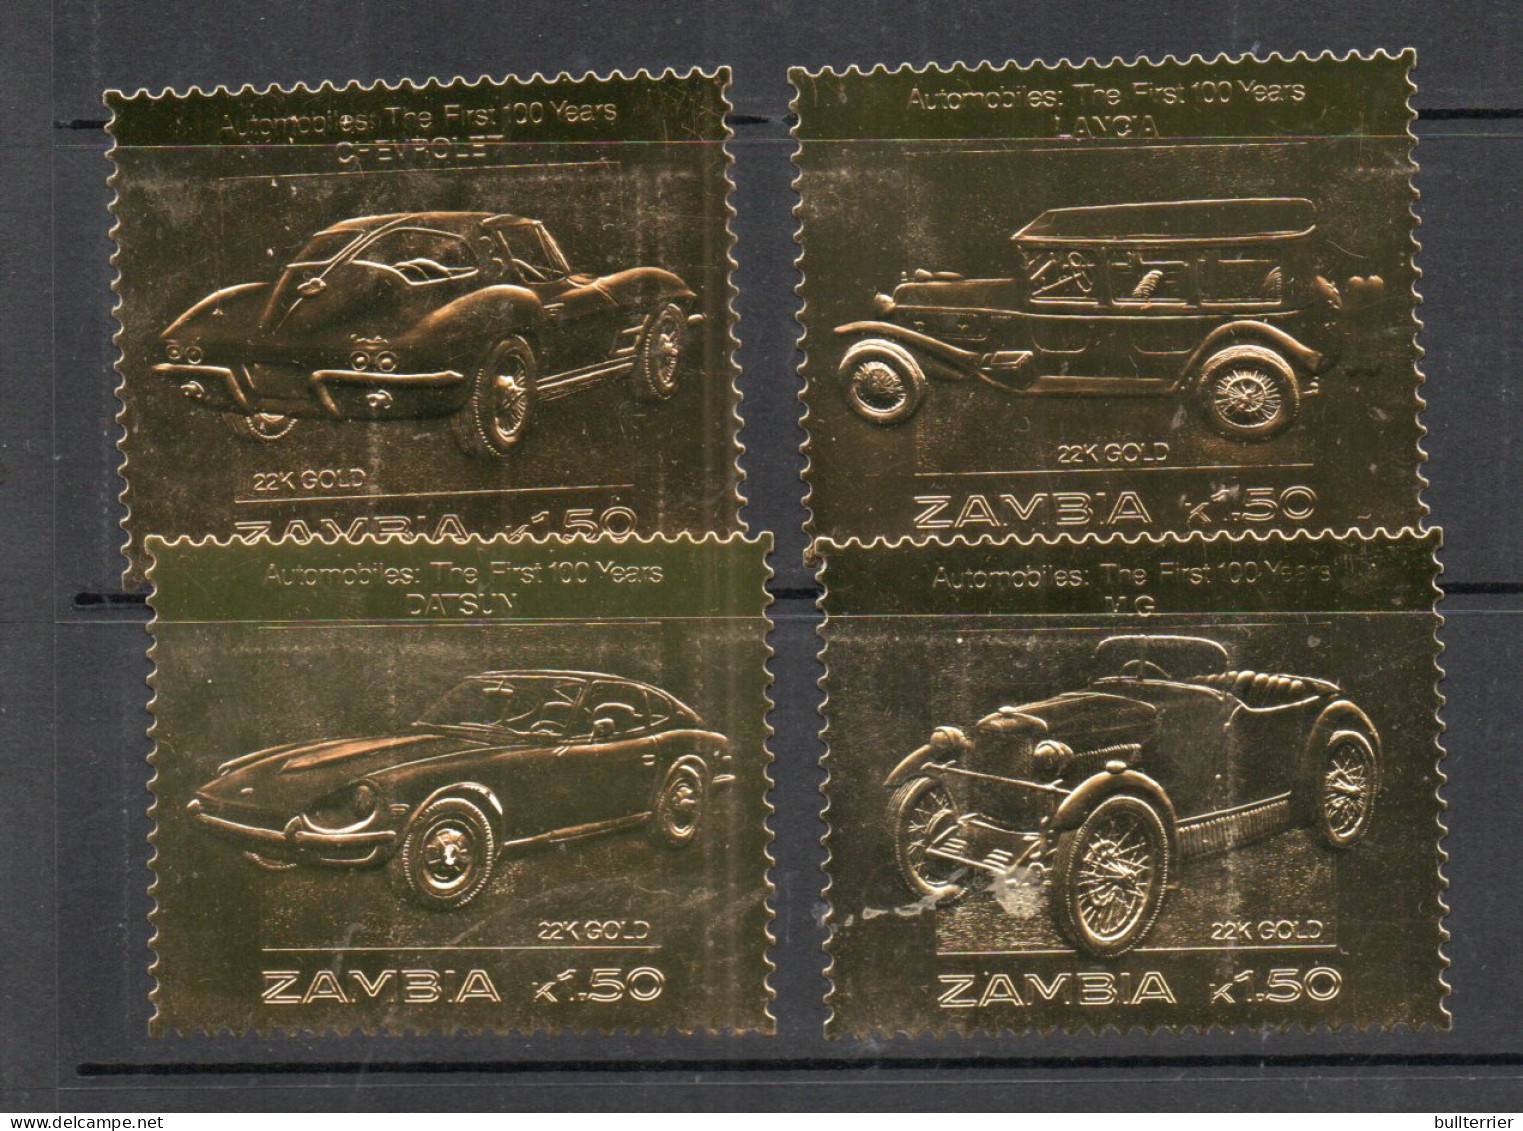 ZAMBIA - 1987 - CLASSIC CARS SET OF 4 GOLD  FOIL EMBOSSED  MINT NEVER HINGED  - Tauben & Flughühner